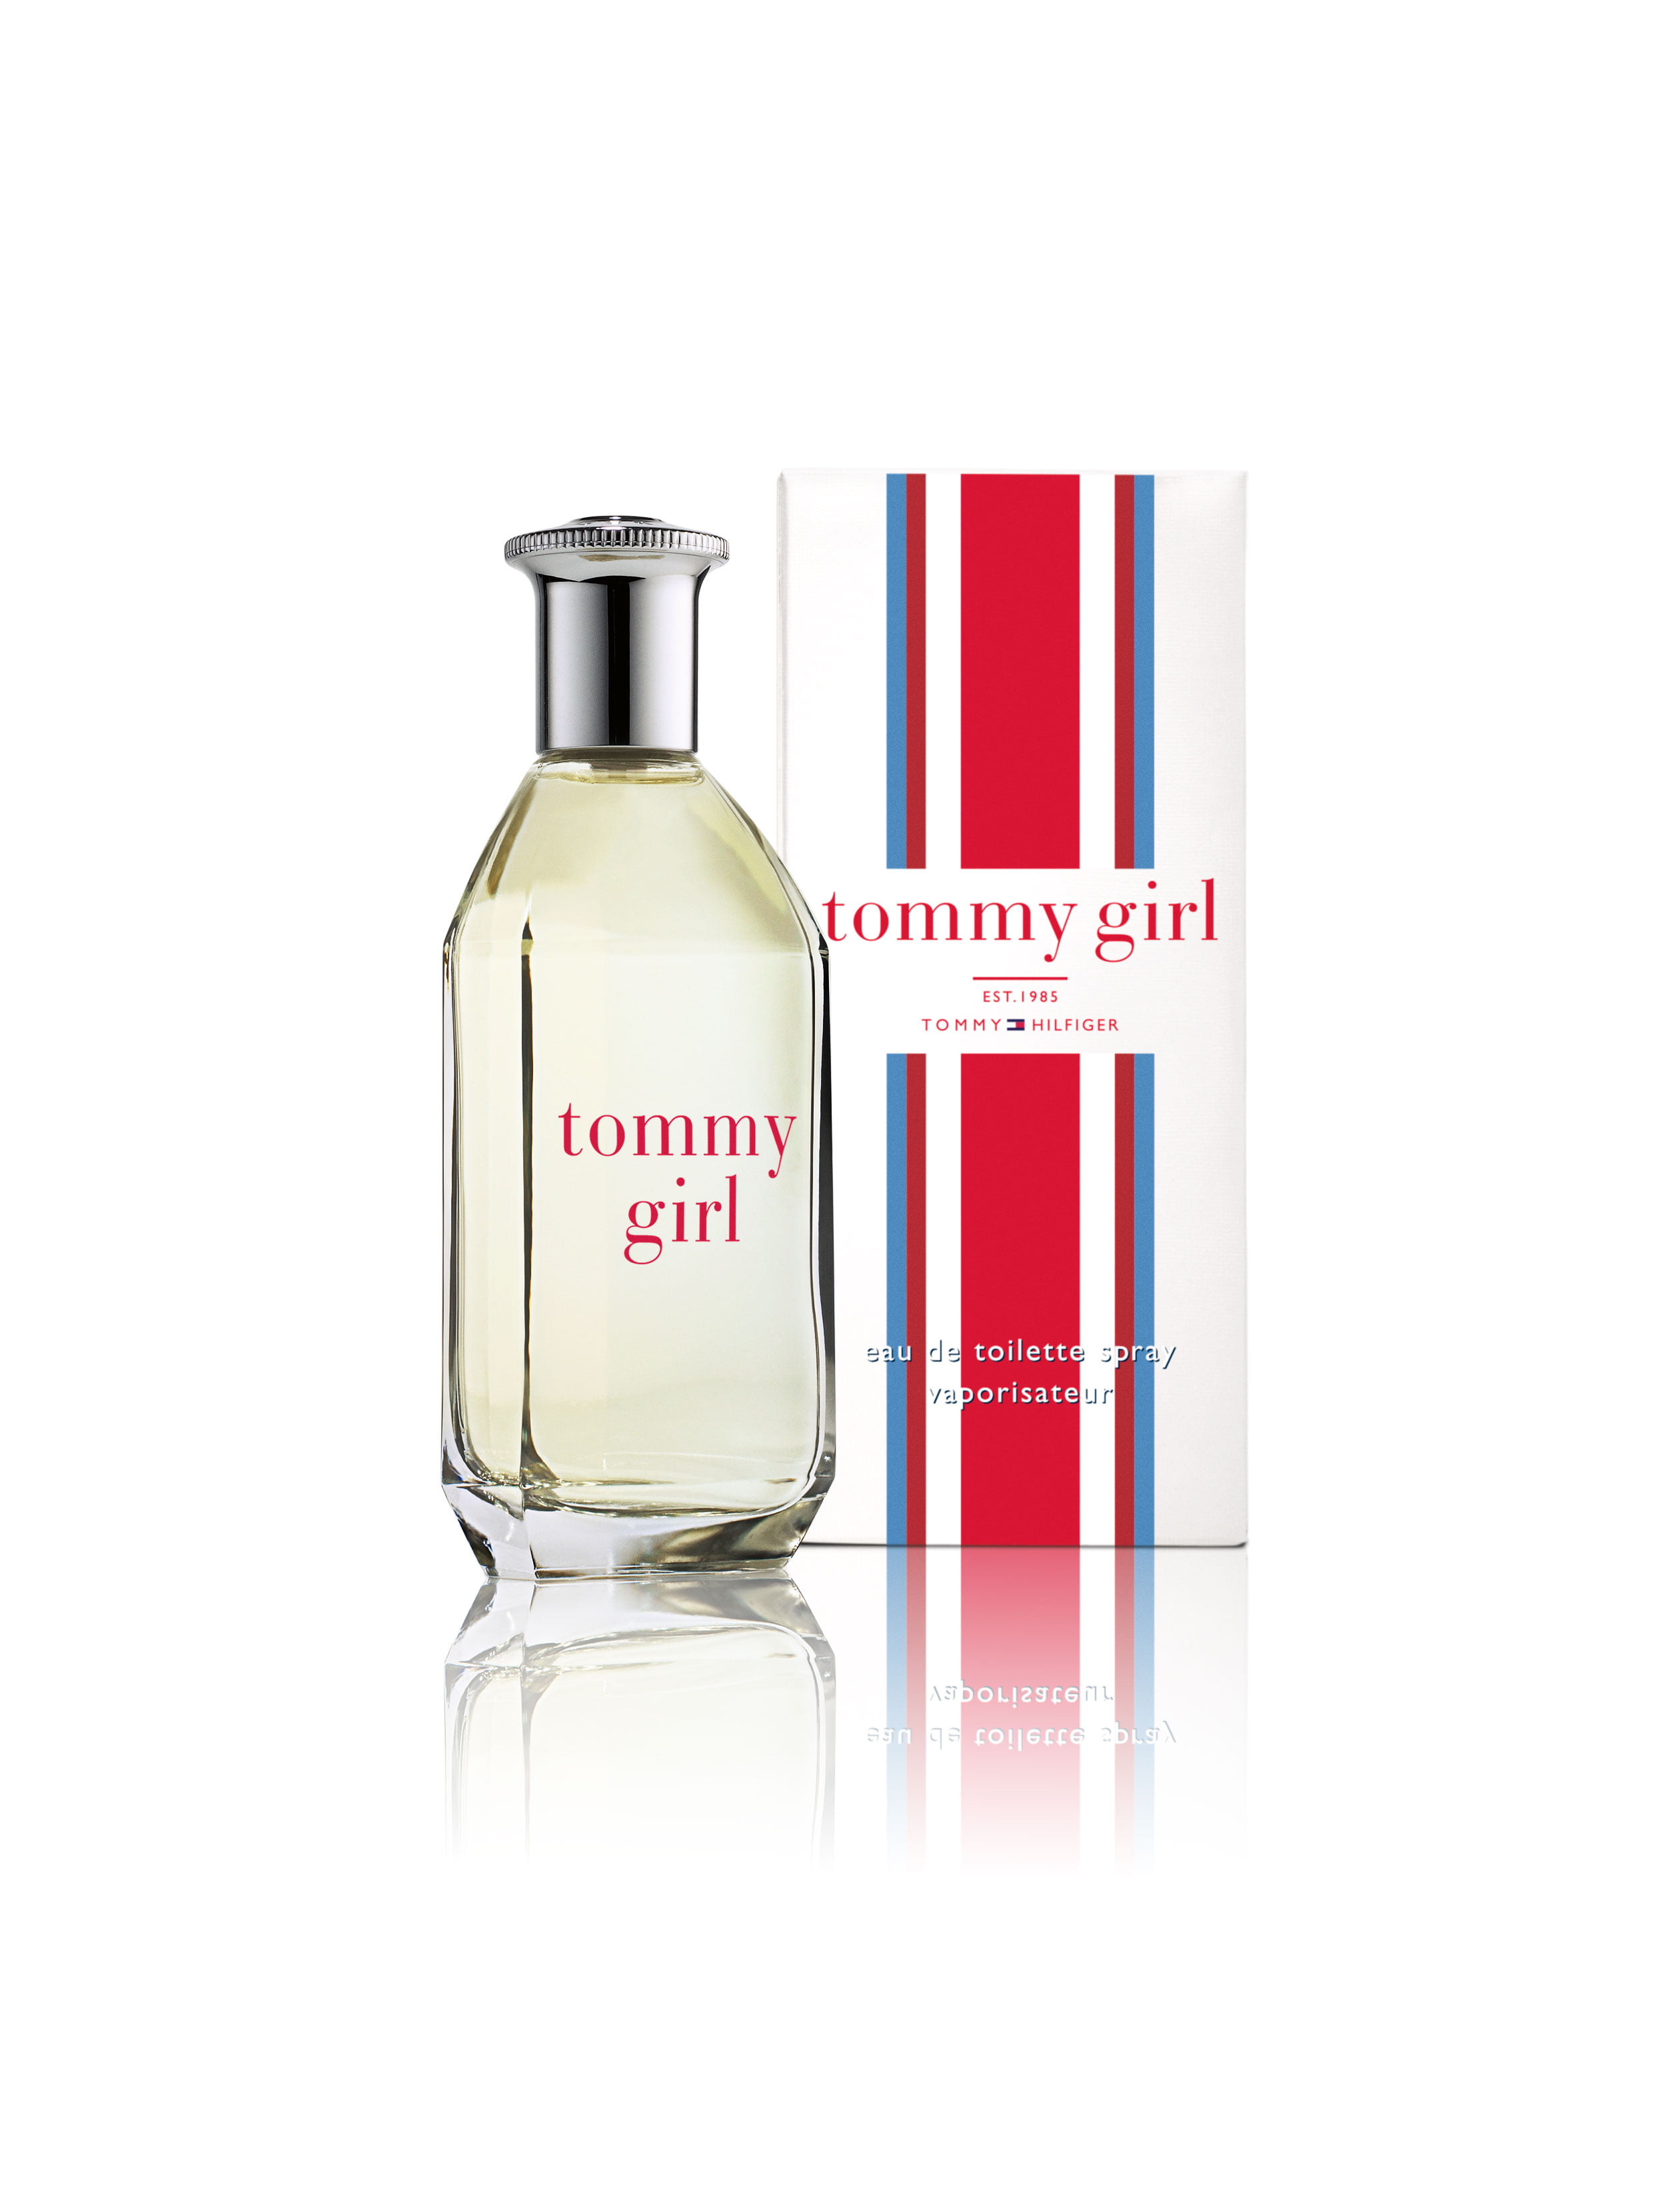 tommy girl perfume target Cheaper Than 